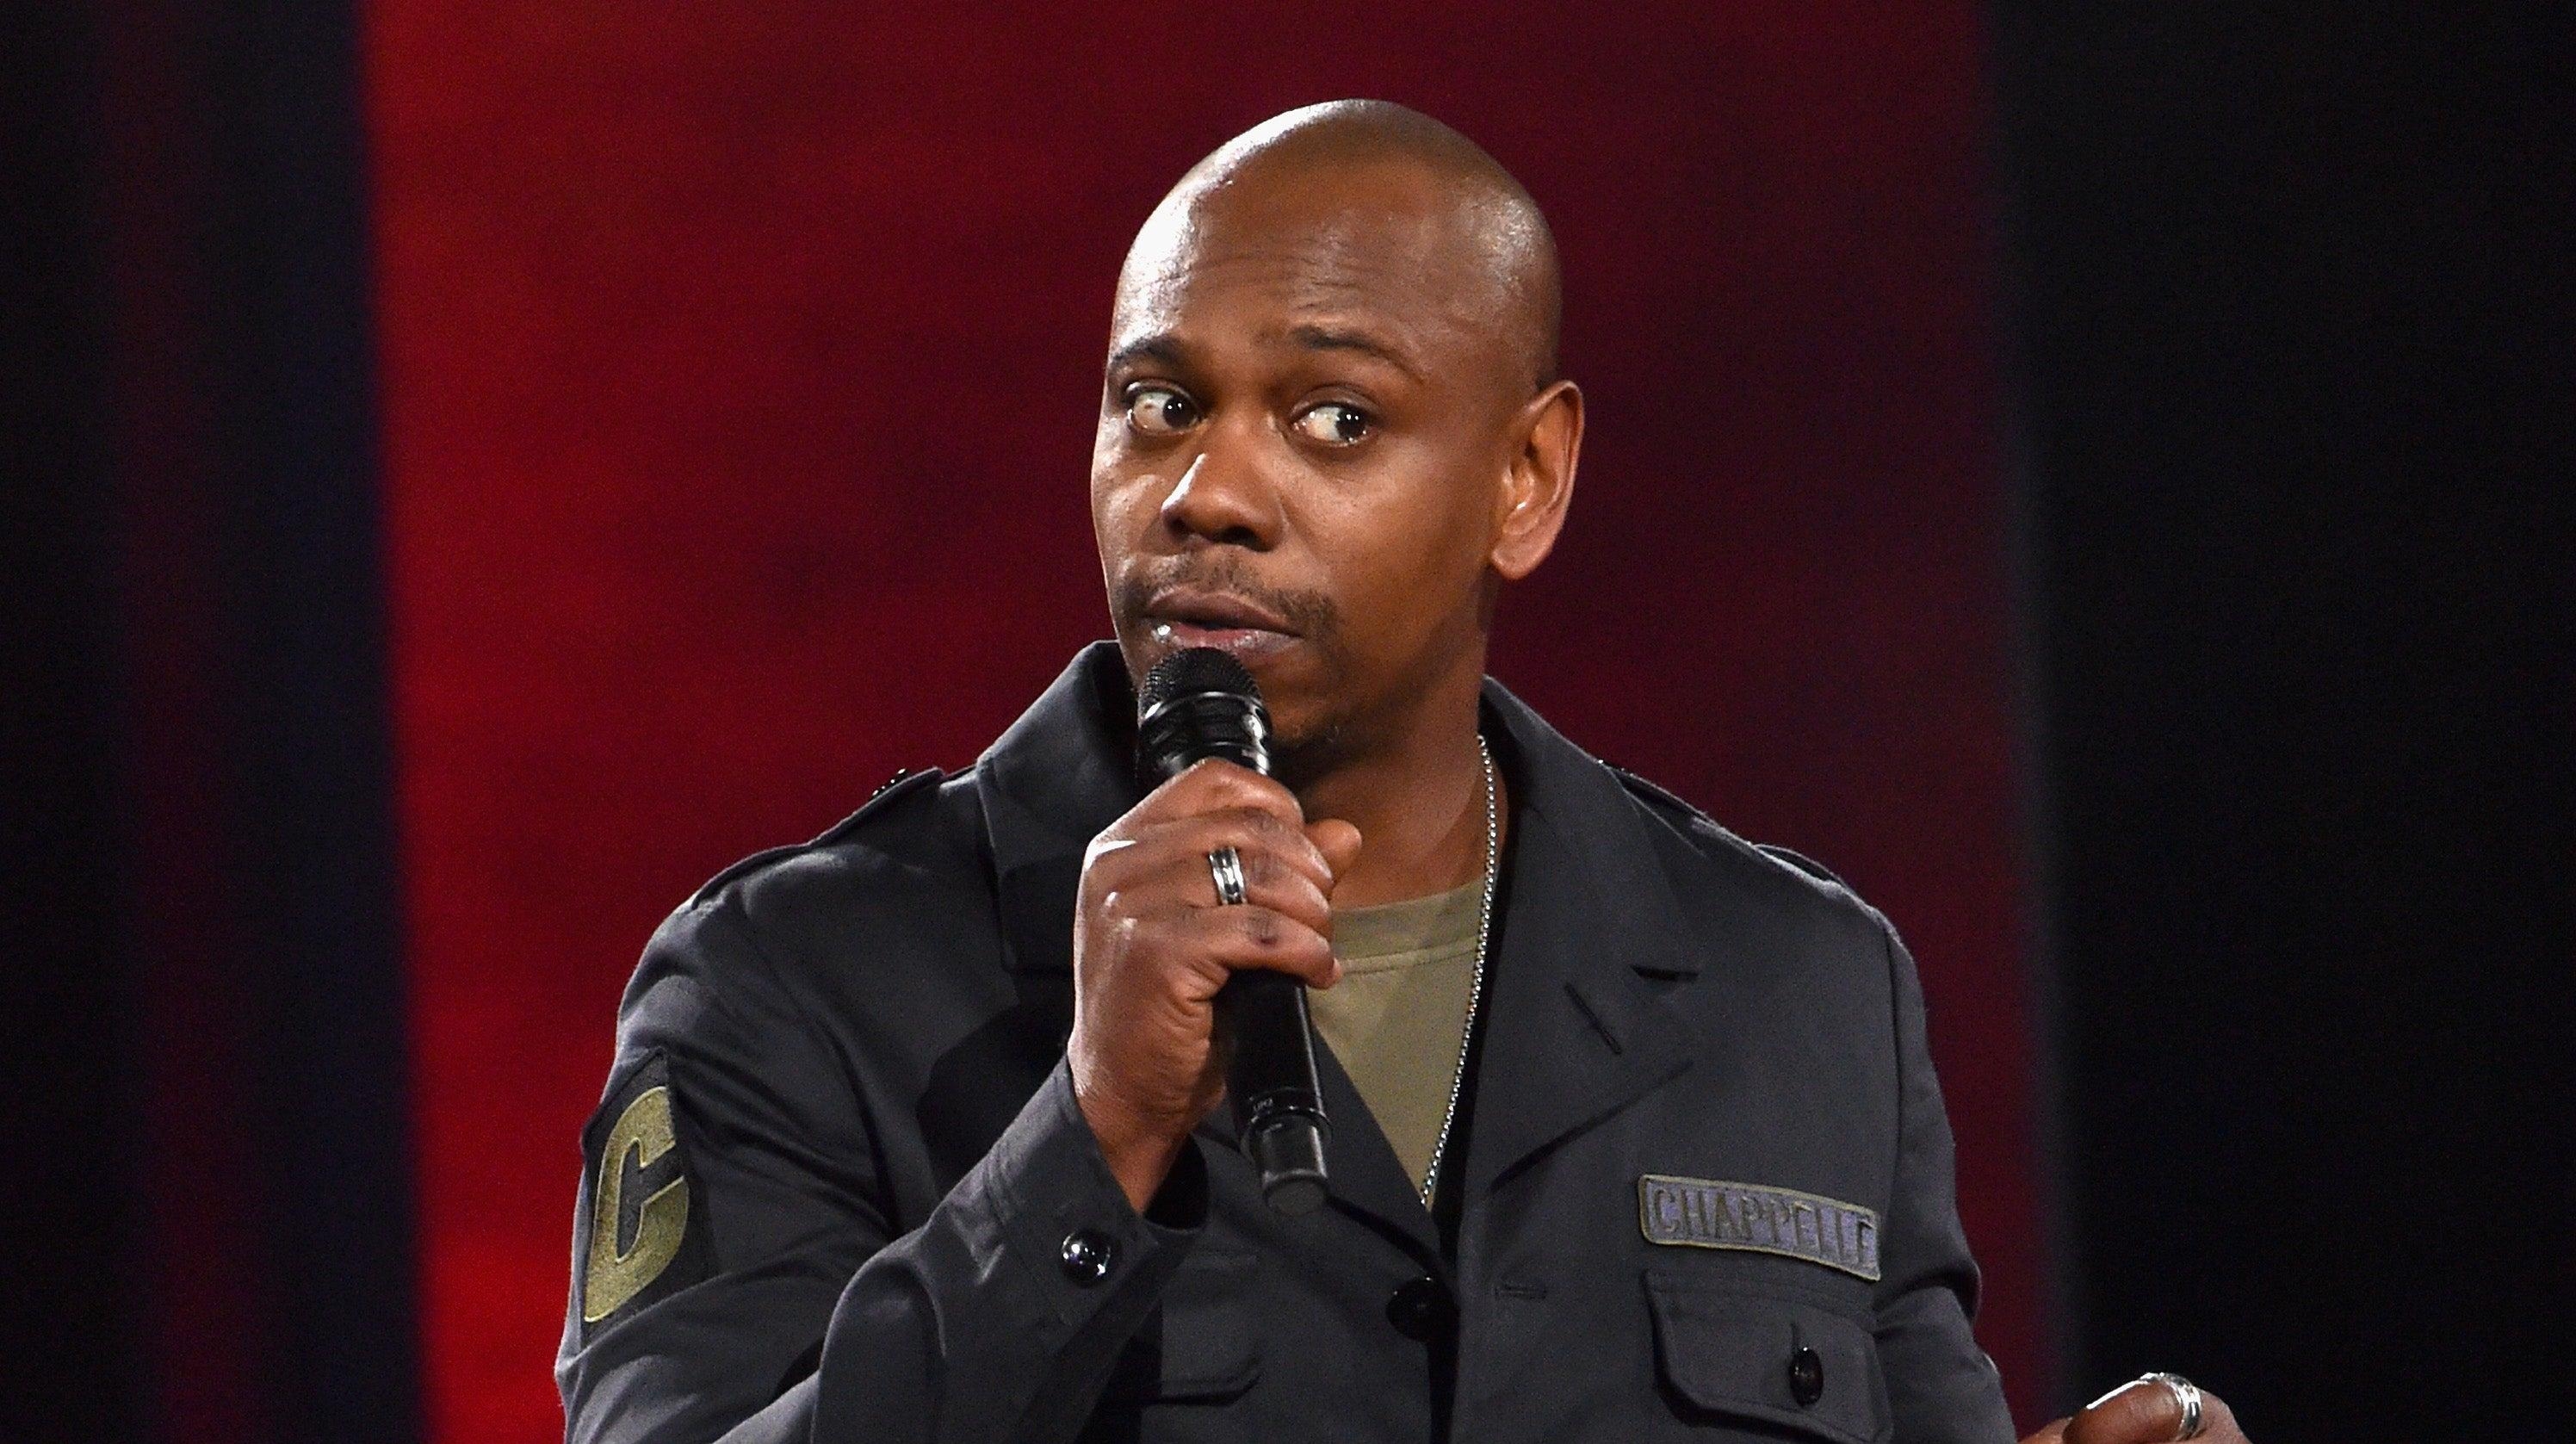 Netflix announces its sixth Dave Chappelle stand-up special, The Closer